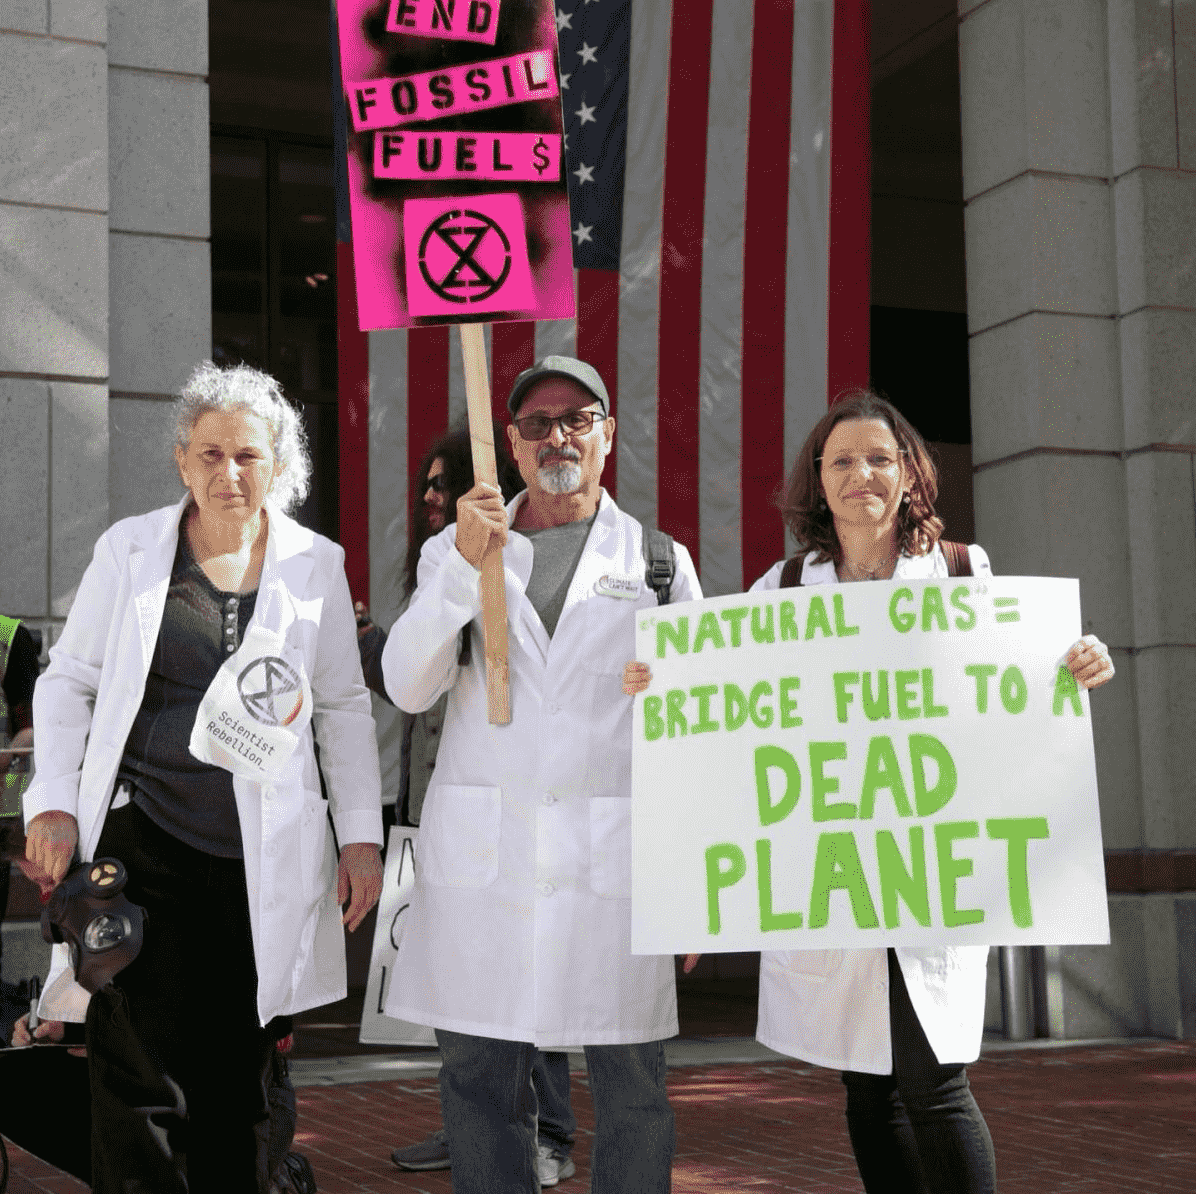 3 scientists stand before an American flag with anti-fossil fuel signs.